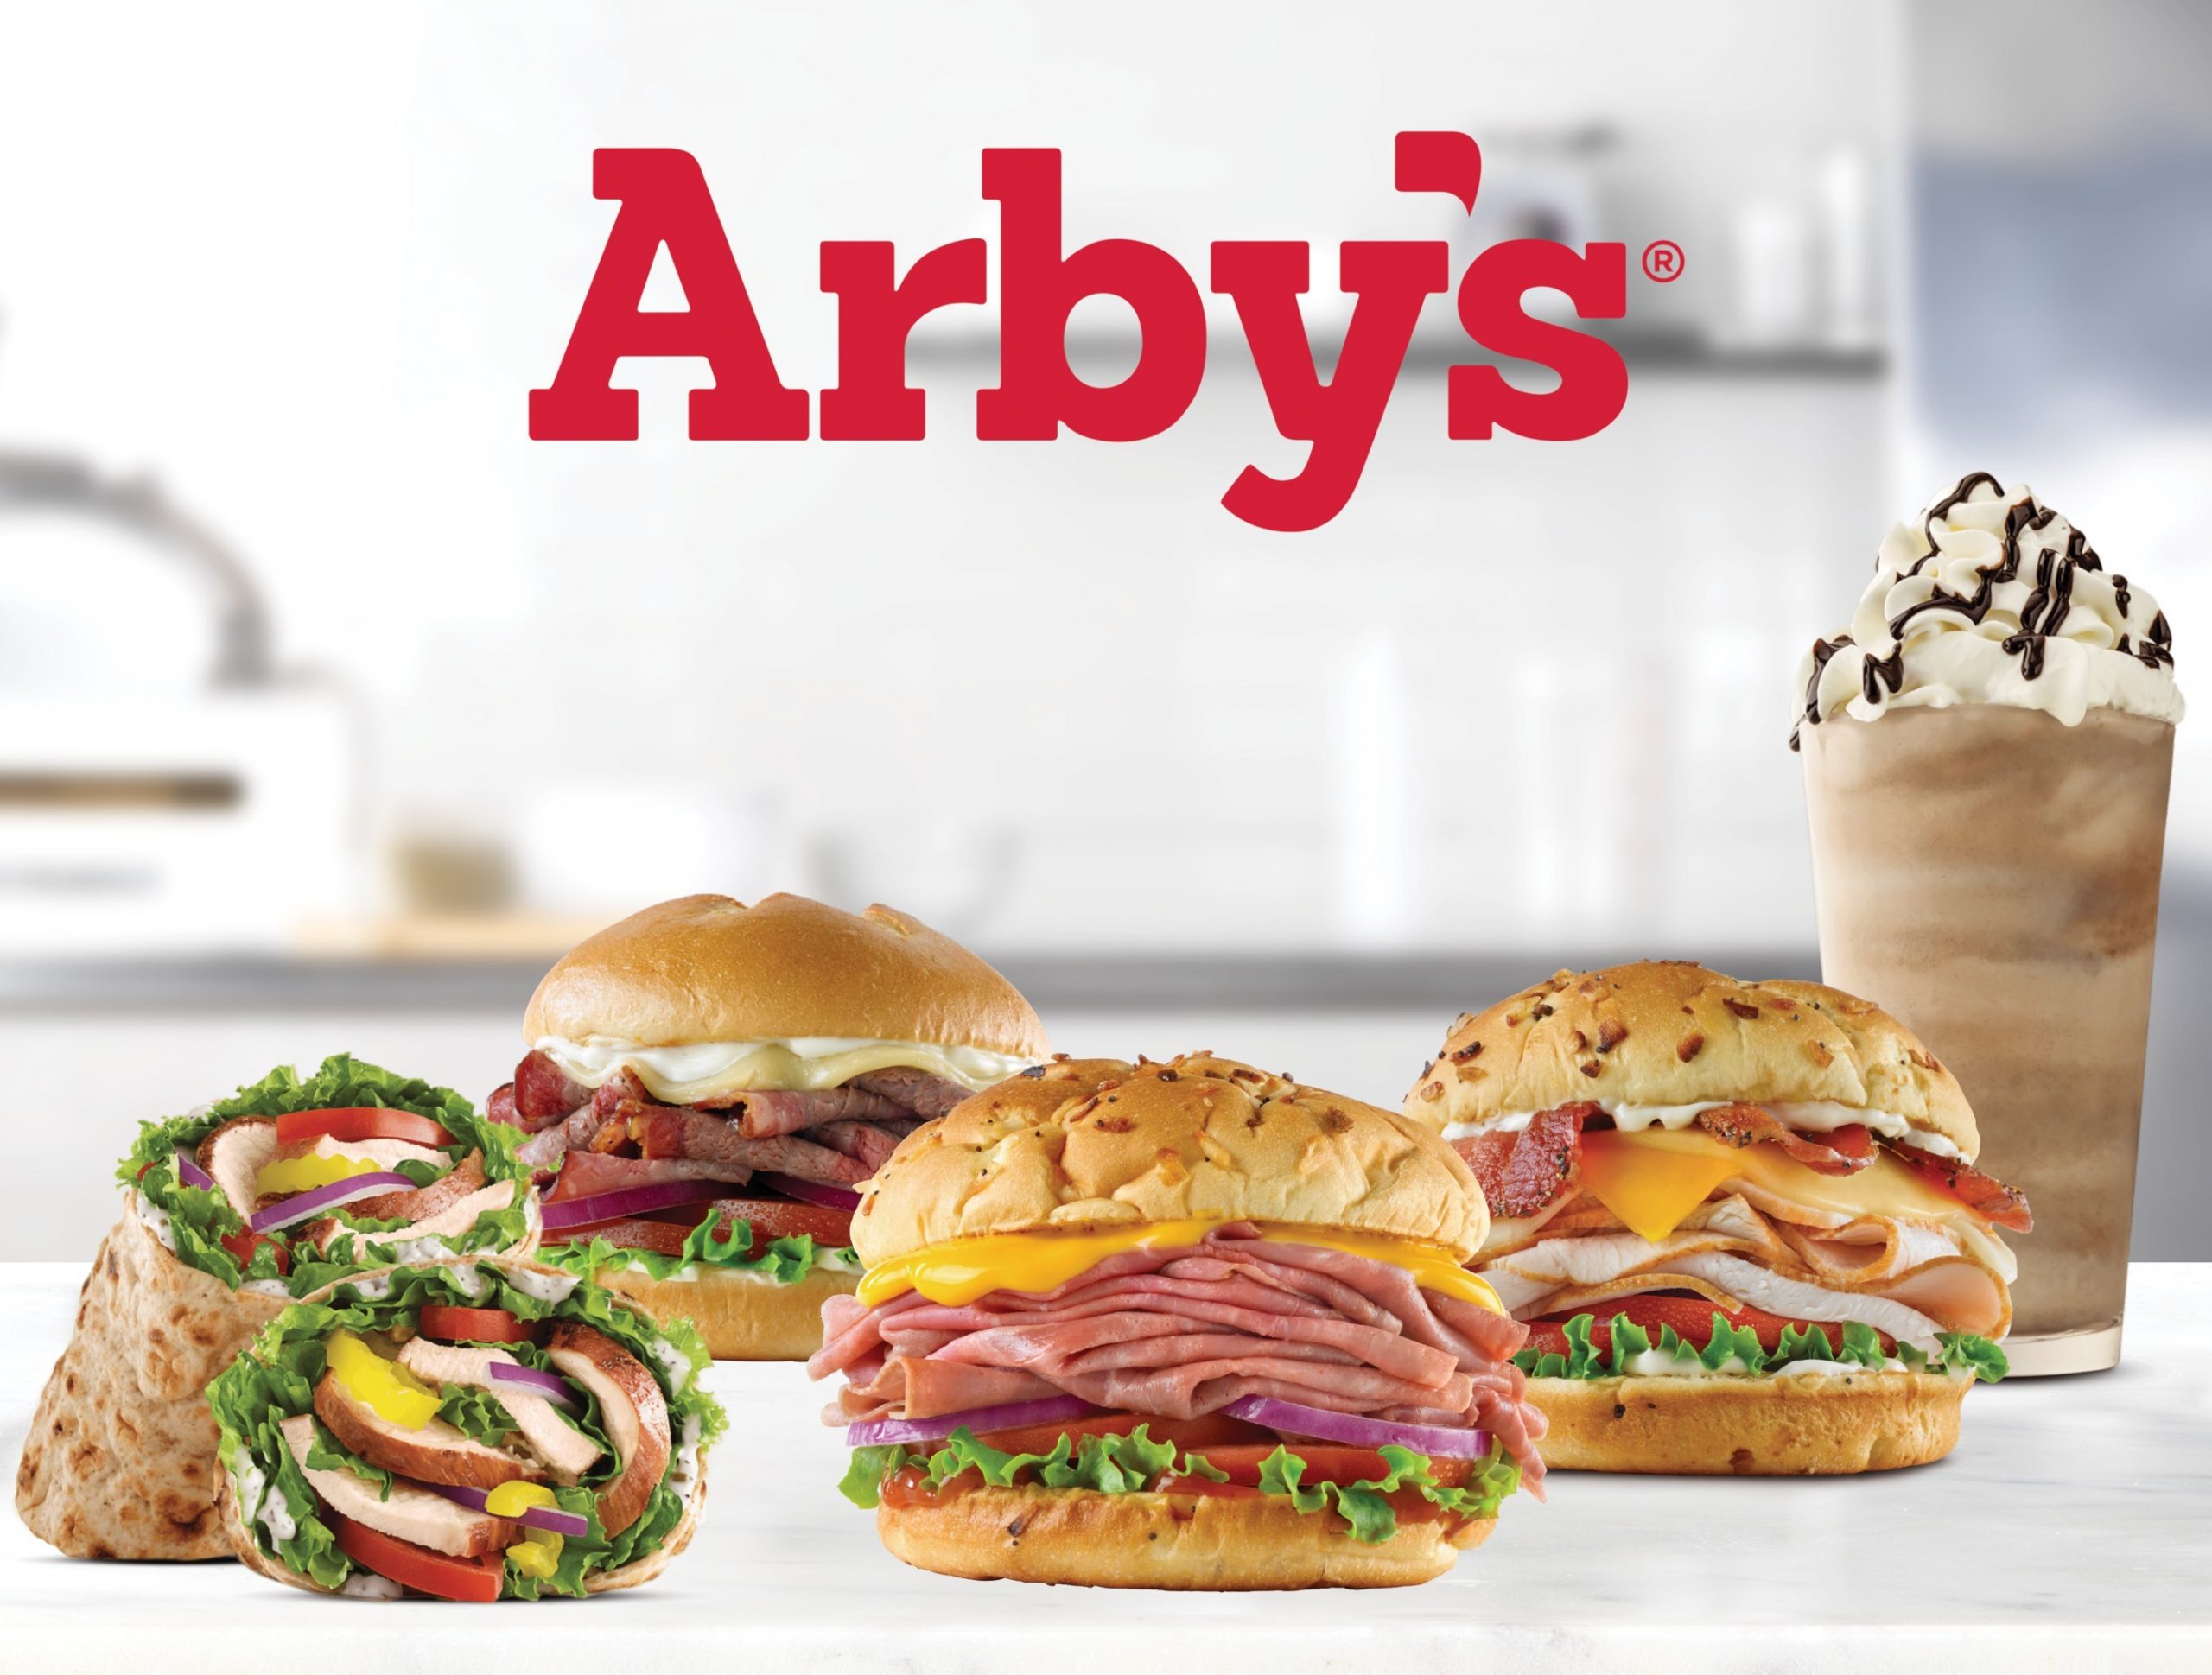 Arby's to debut in the KSA later this year